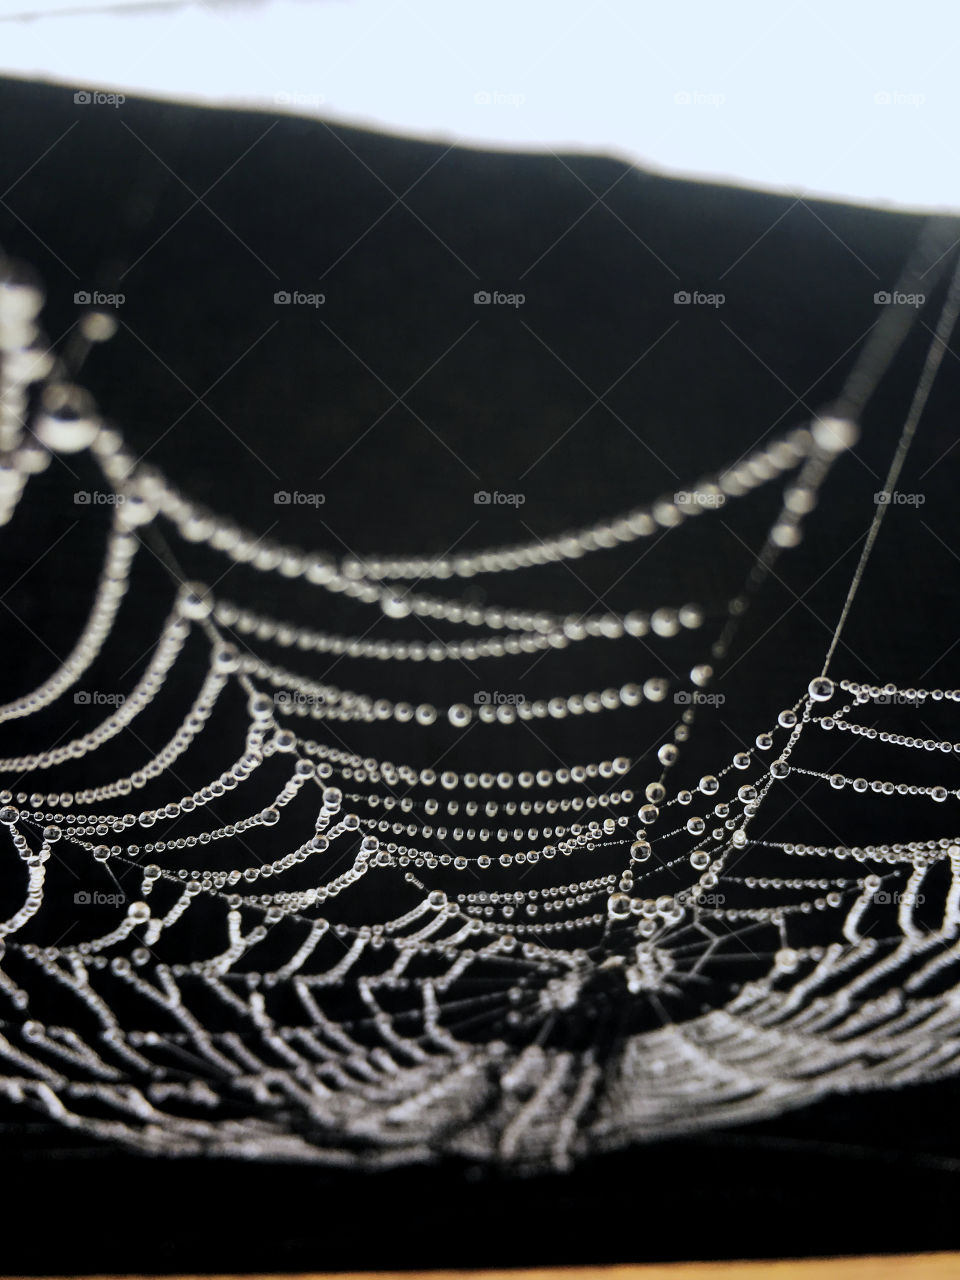 A delicate intricate spiderweb bearing the weight of hundreds of tiny rain droplets